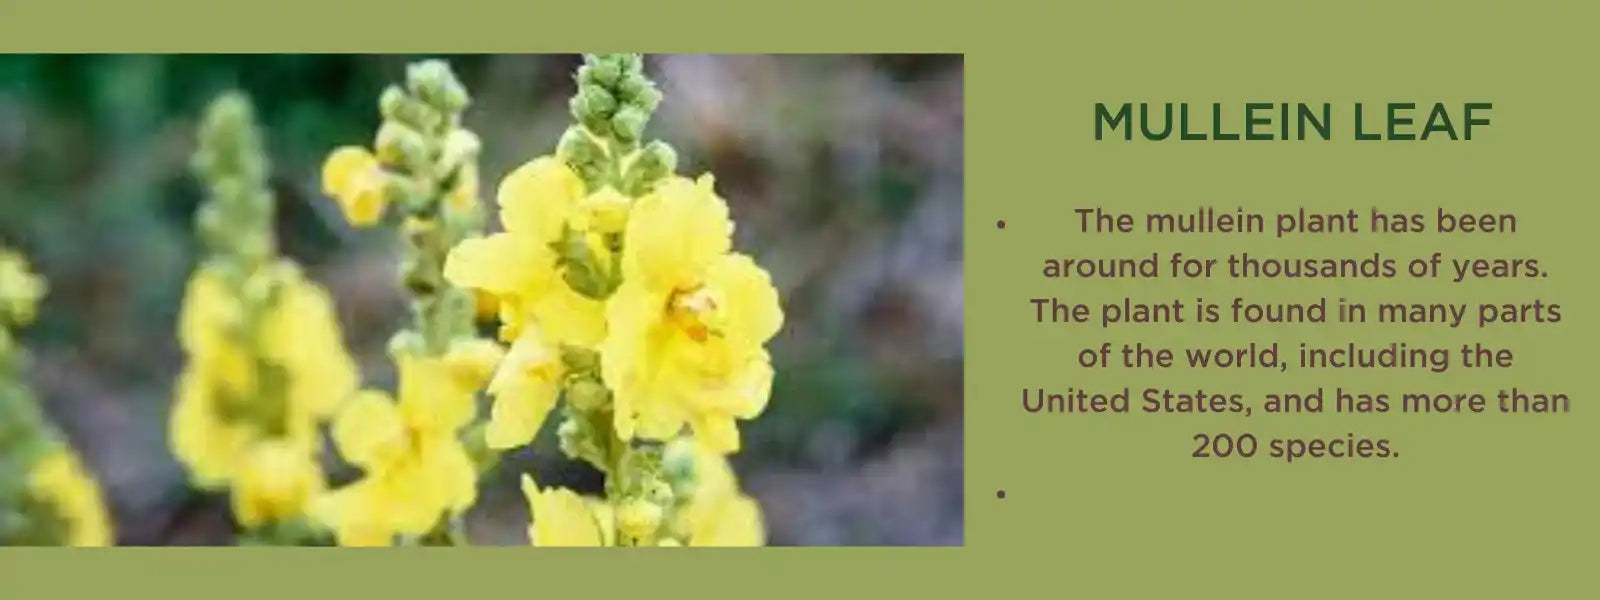 Mullein leaves- Health Benefits, Uses and Important Facts